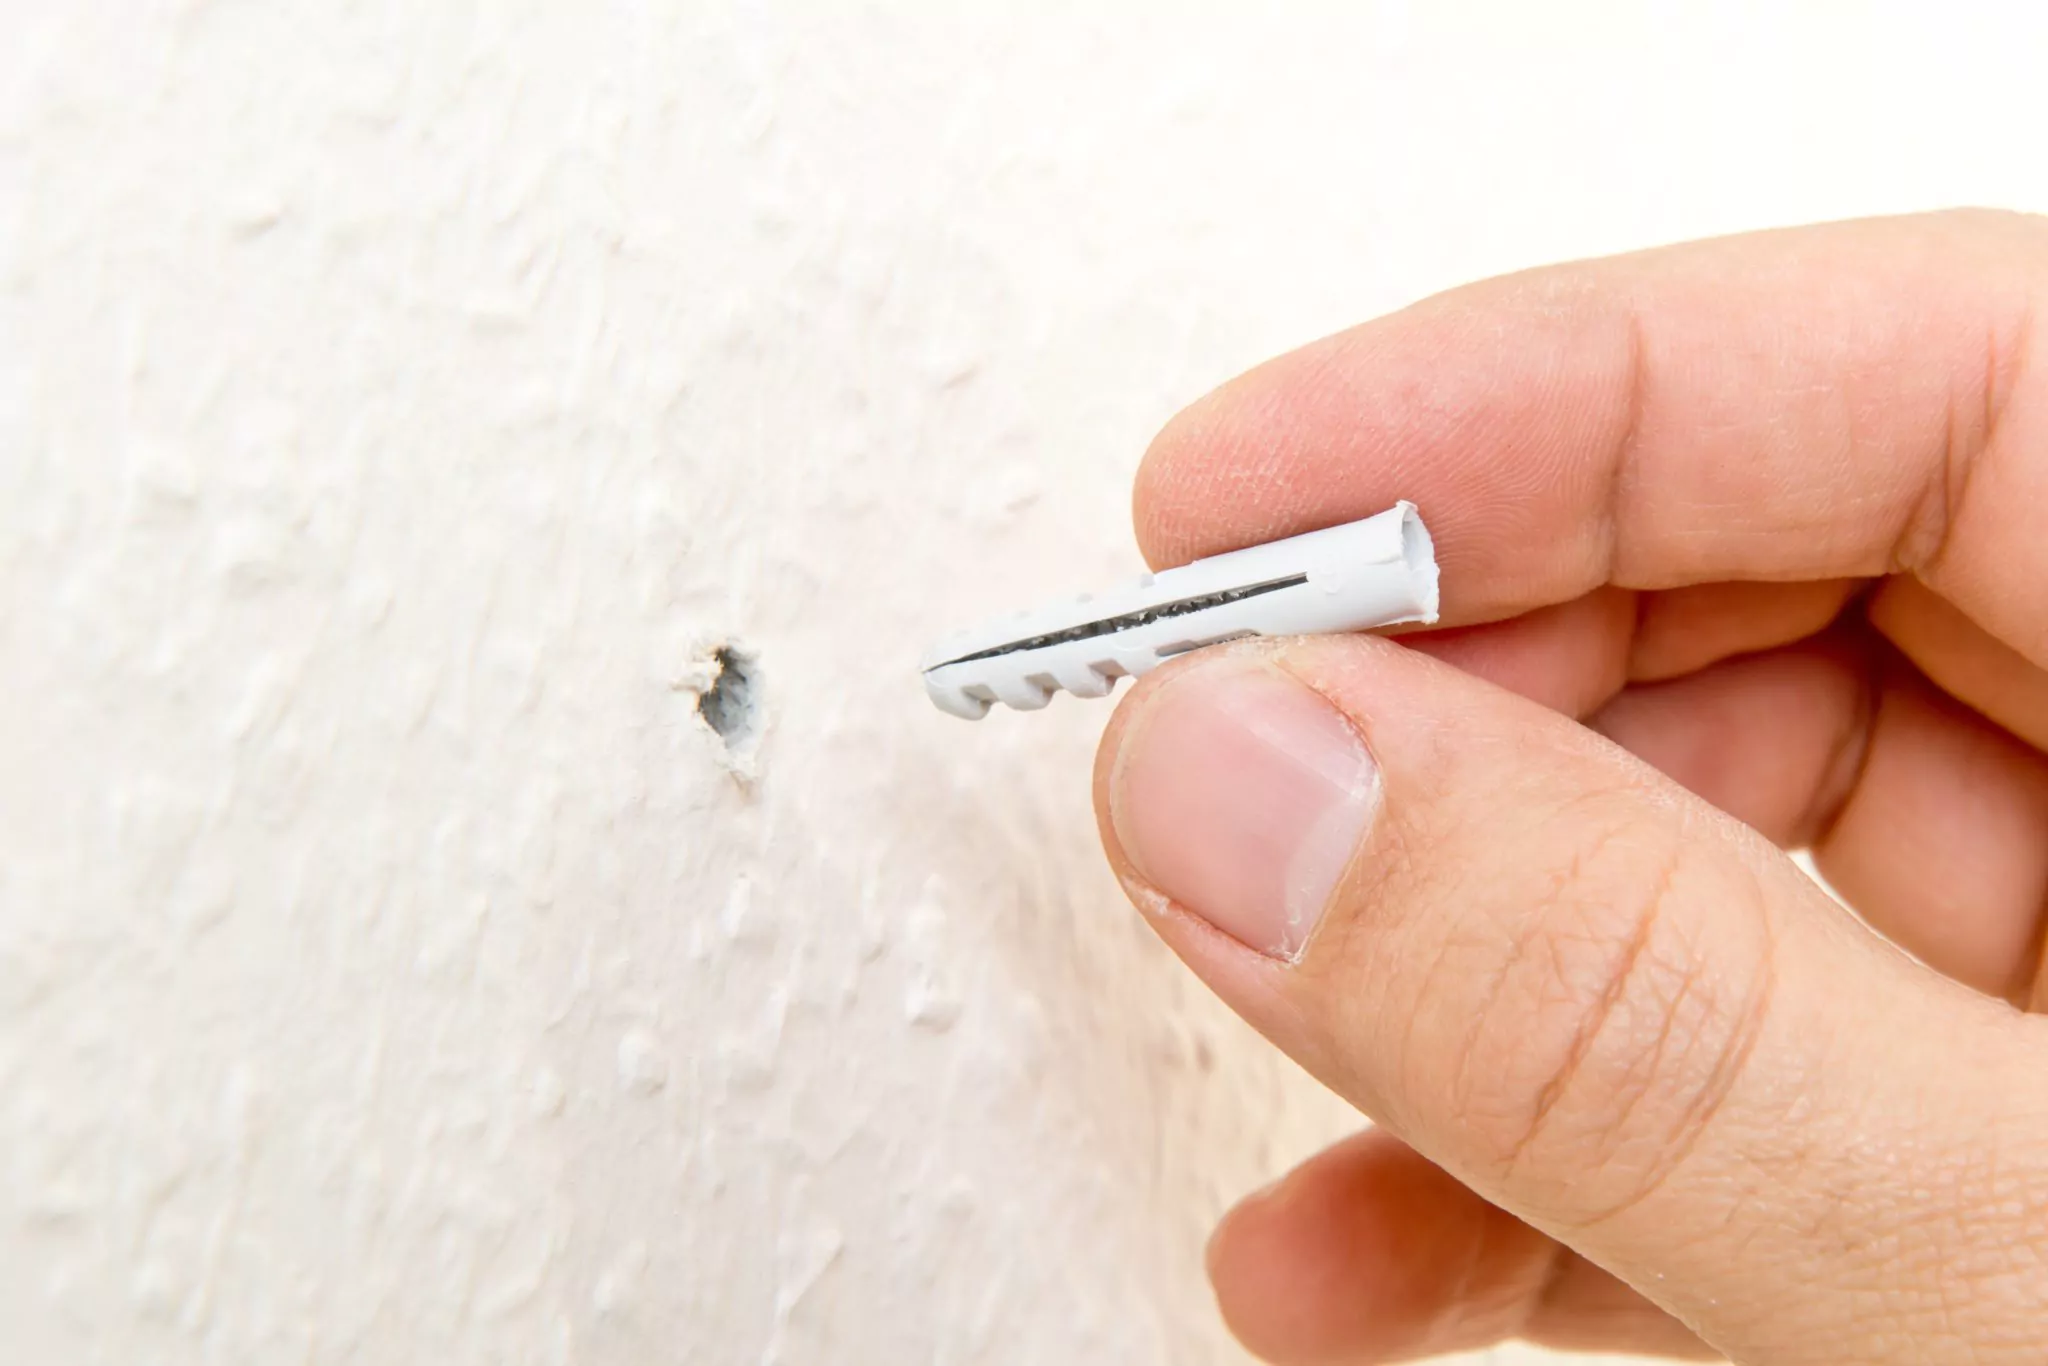 How To Use Drywall Anchors, How To Install Wall Anchors For Shelves